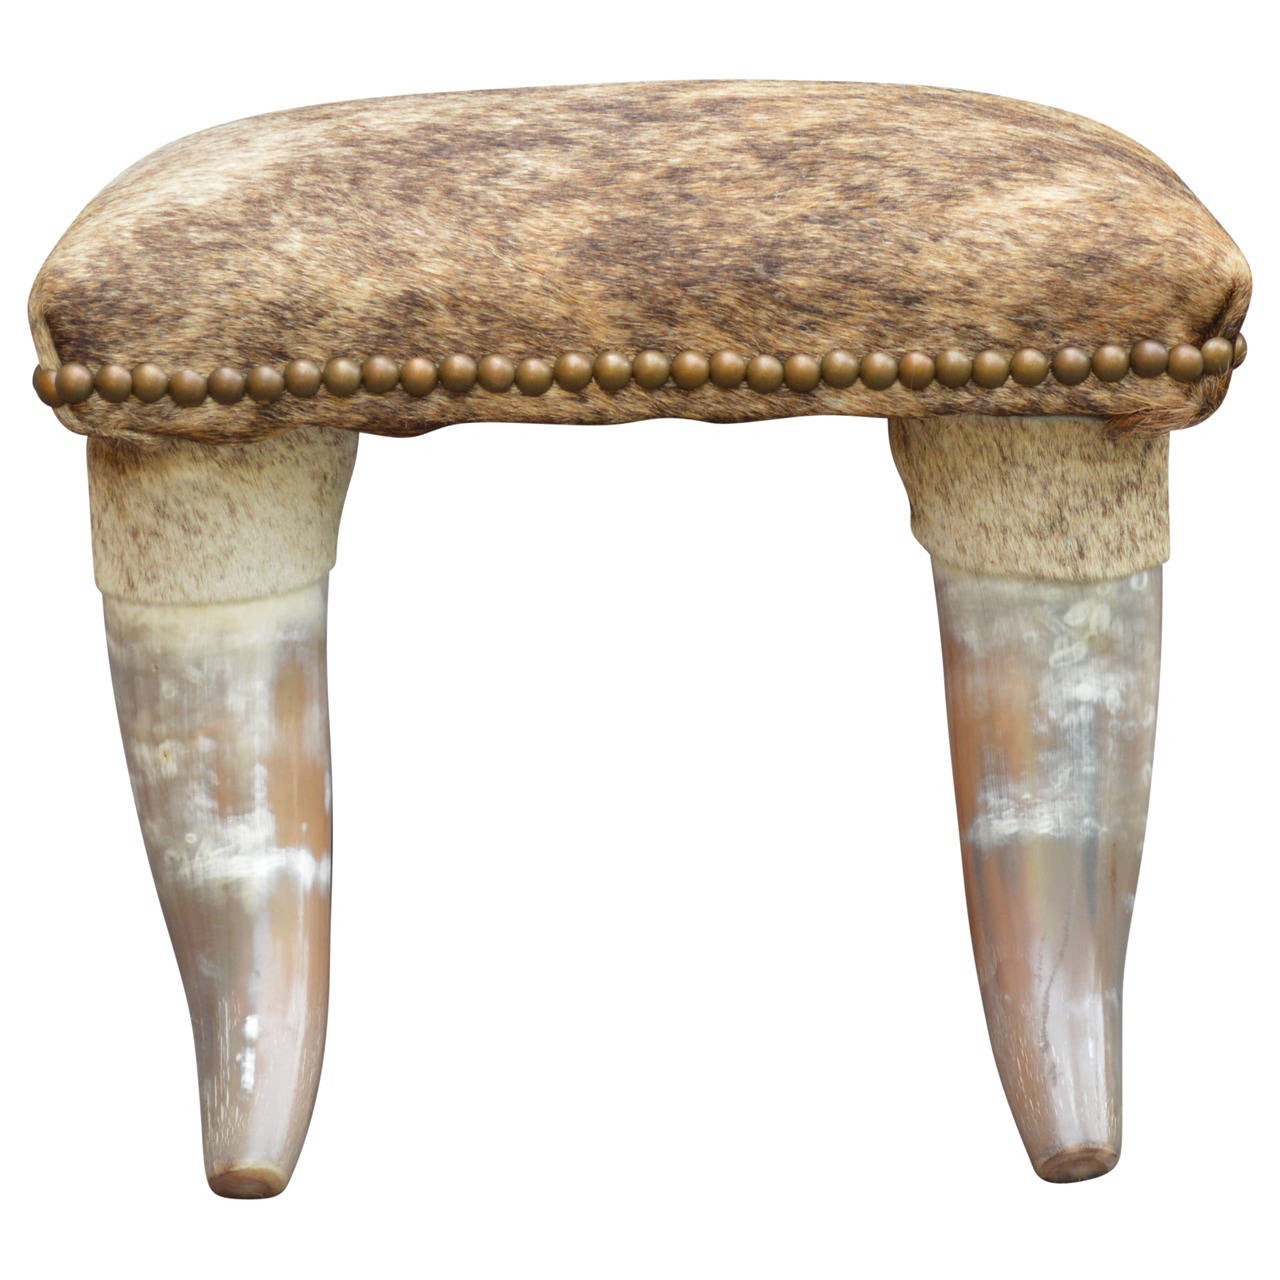 Beautiful longhorn footstool with brindle cowhide cover in shades of brown, accented with antiqued brass nailheads.